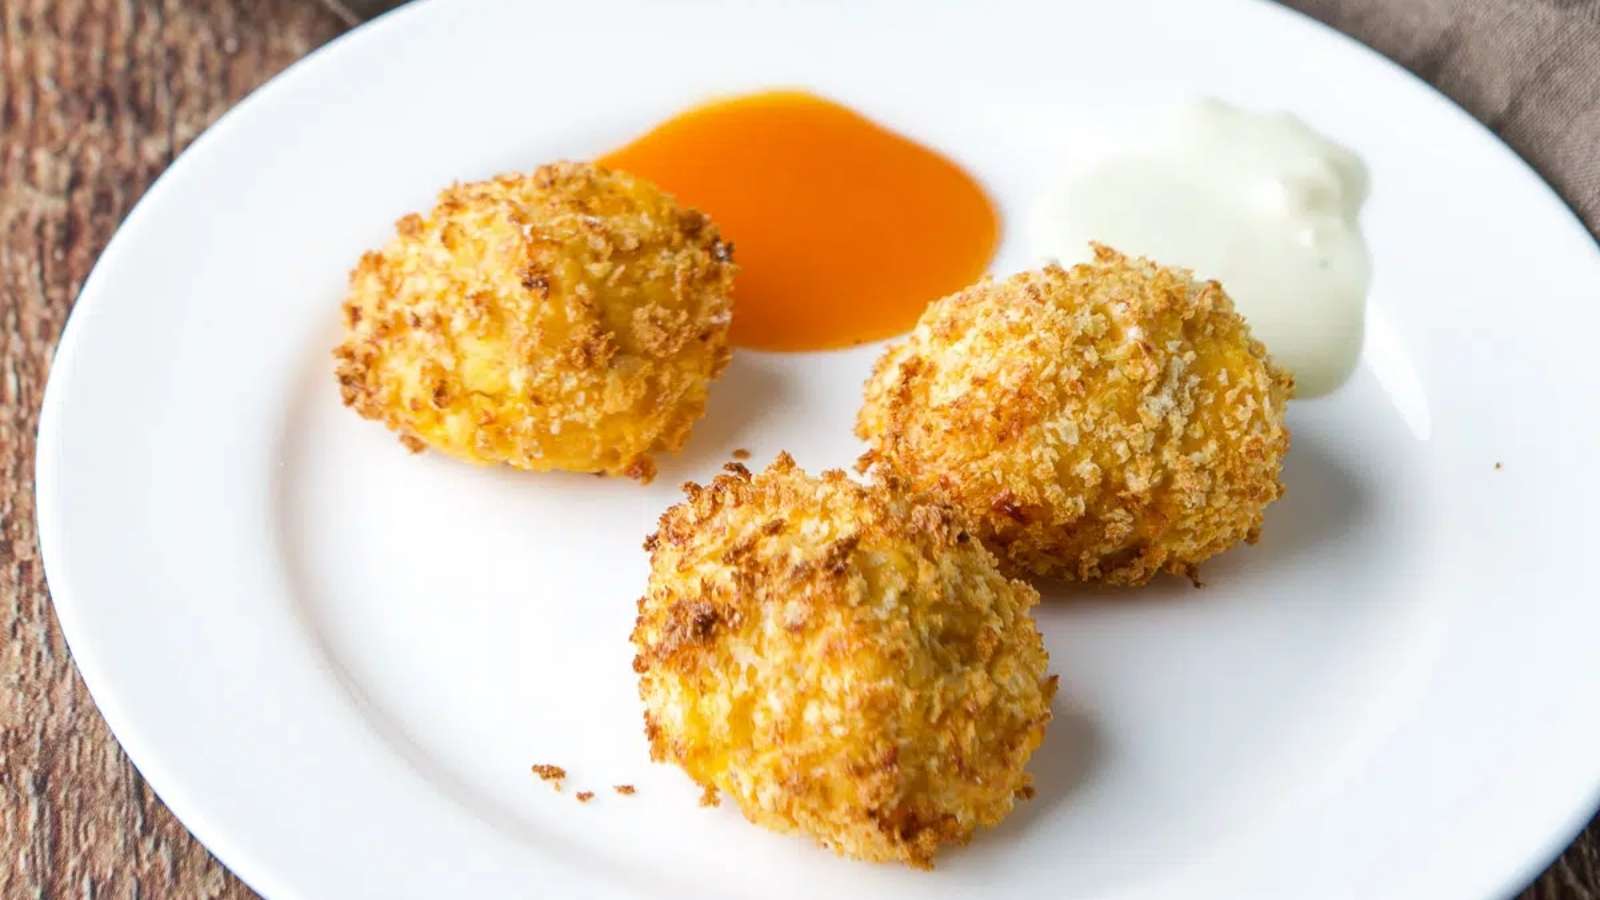 Three fried potato balls on a plate with sauce.